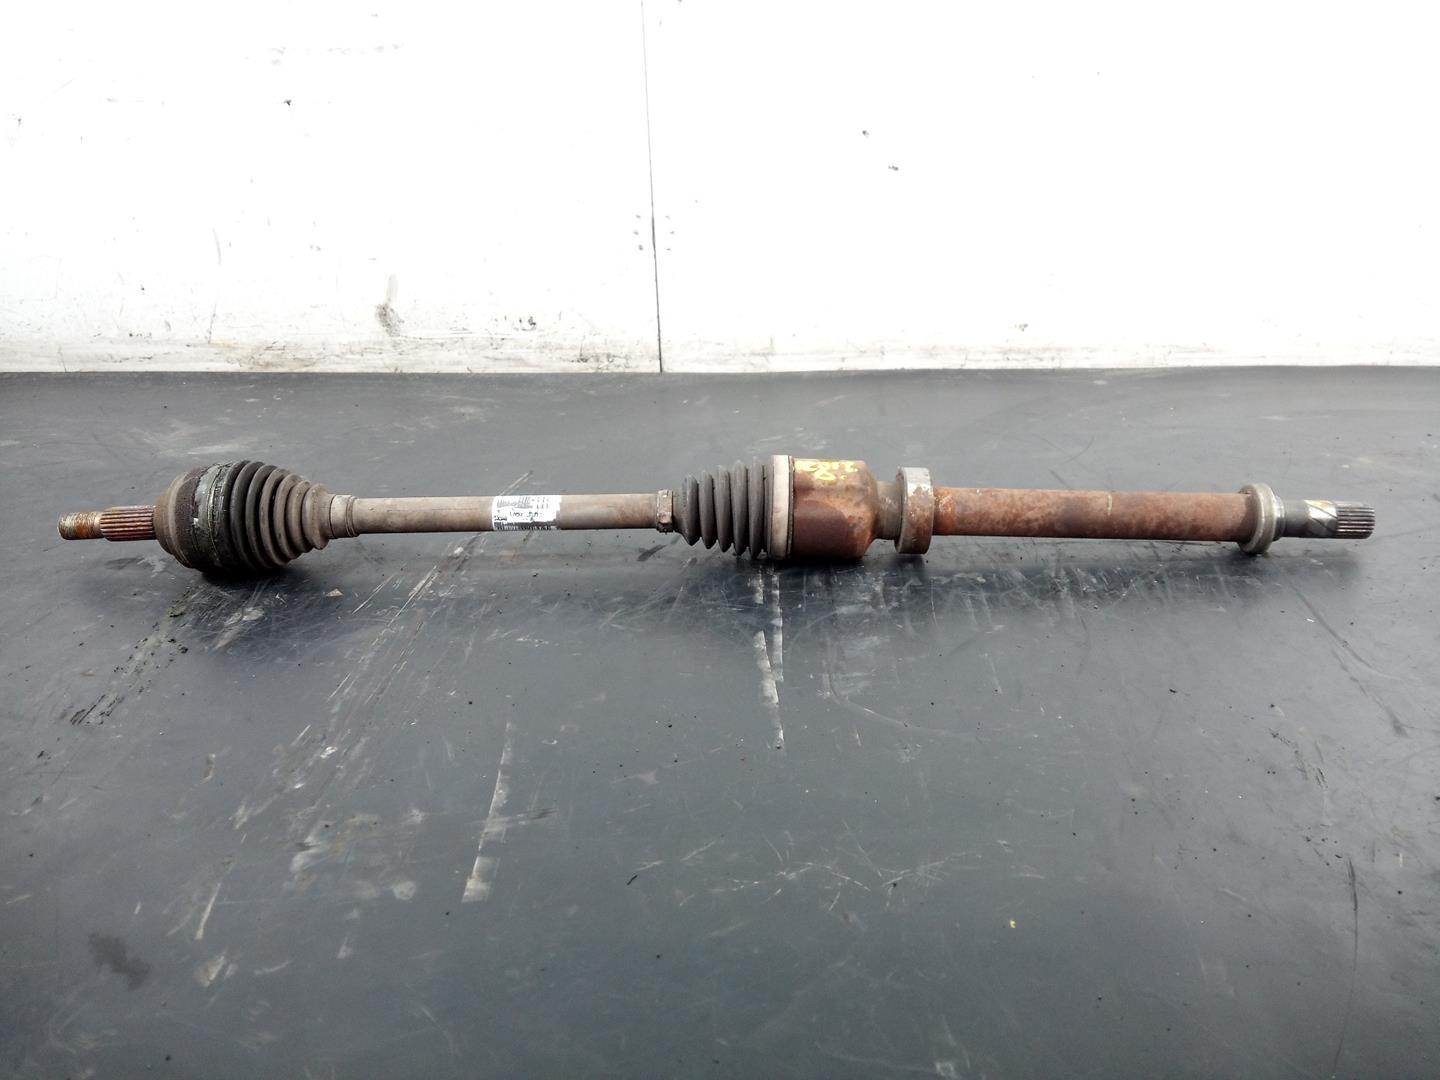 RENAULT Clio 3 generation (2005-2012) Front Right Driveshaft 391008239R, P1-A6-23 23301754